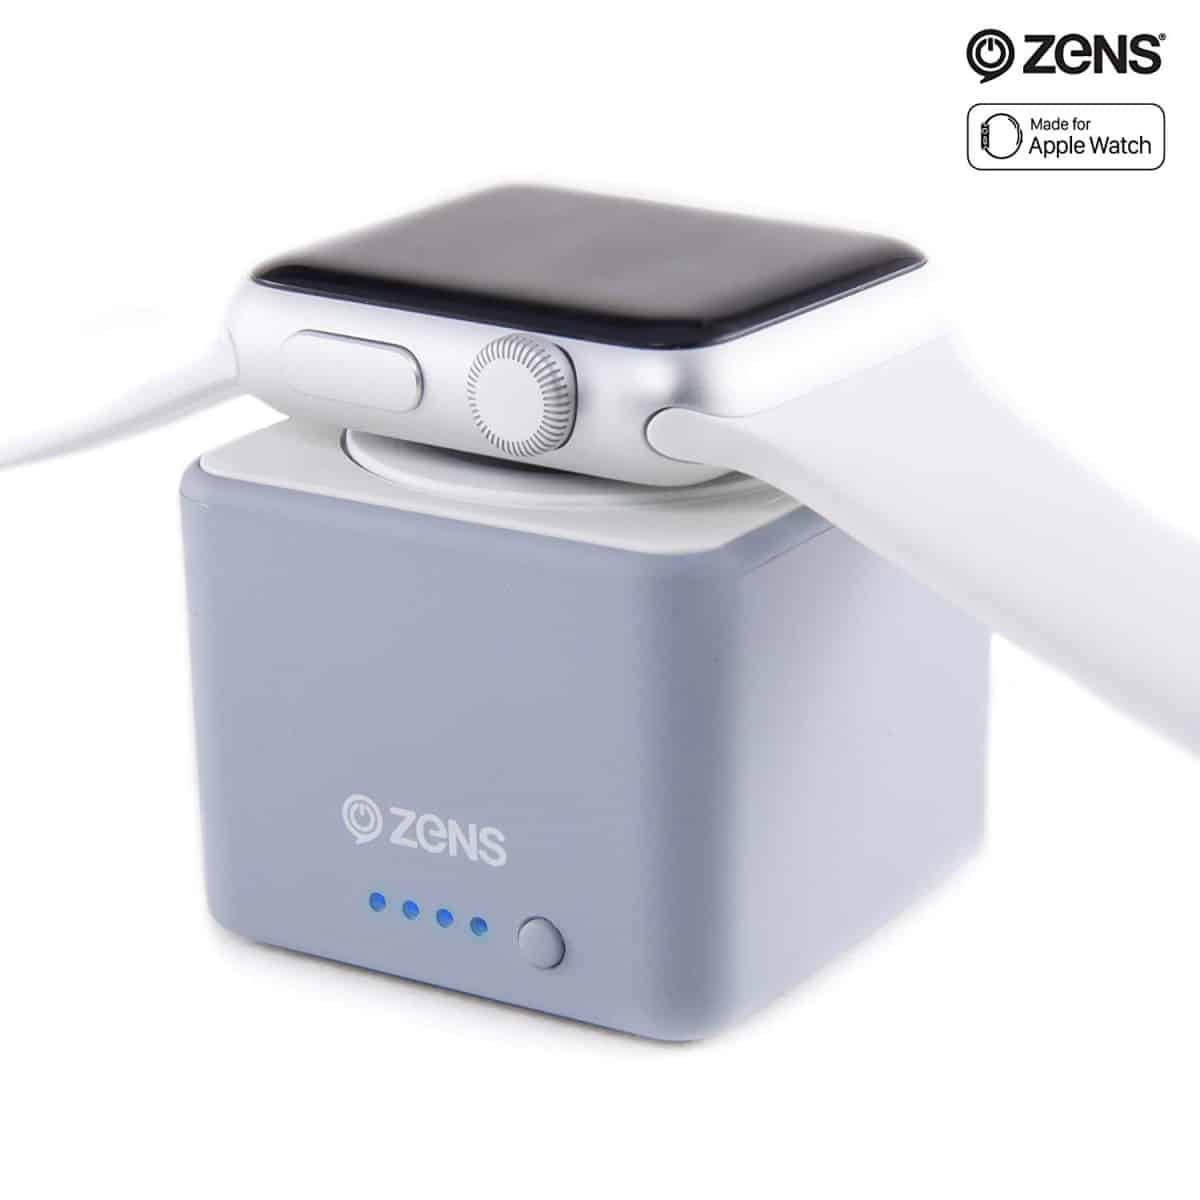 ZENS Apple Watch Powerbank | Apple Watch Accessories You Didn't Know You Needed